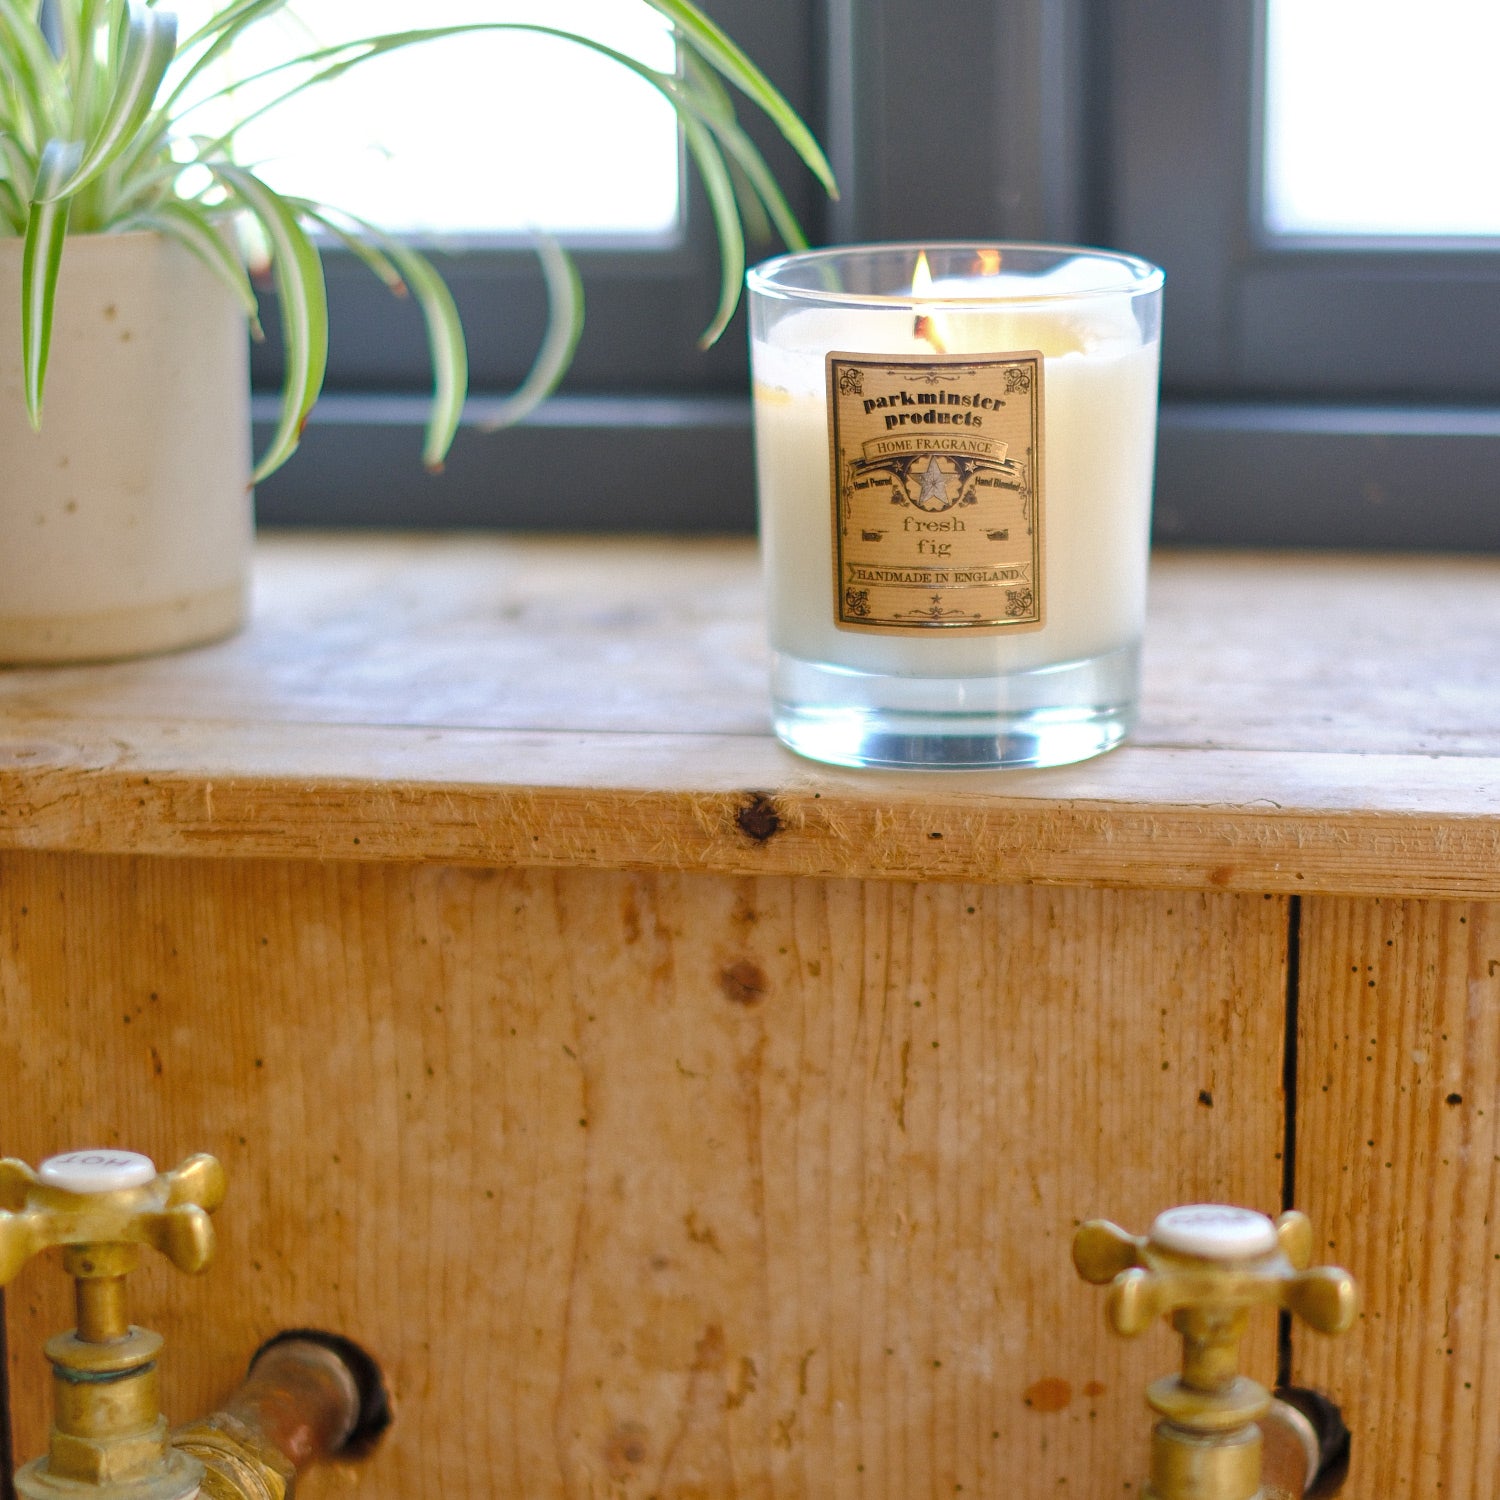 Parkminster's large votive soy wax candles, crafted with our number one fragrance, Fresh Fig, created in our Cornwall workshop by skilled artisans. Fragrance crafted by Krystyna Patey, our resident perfumer.